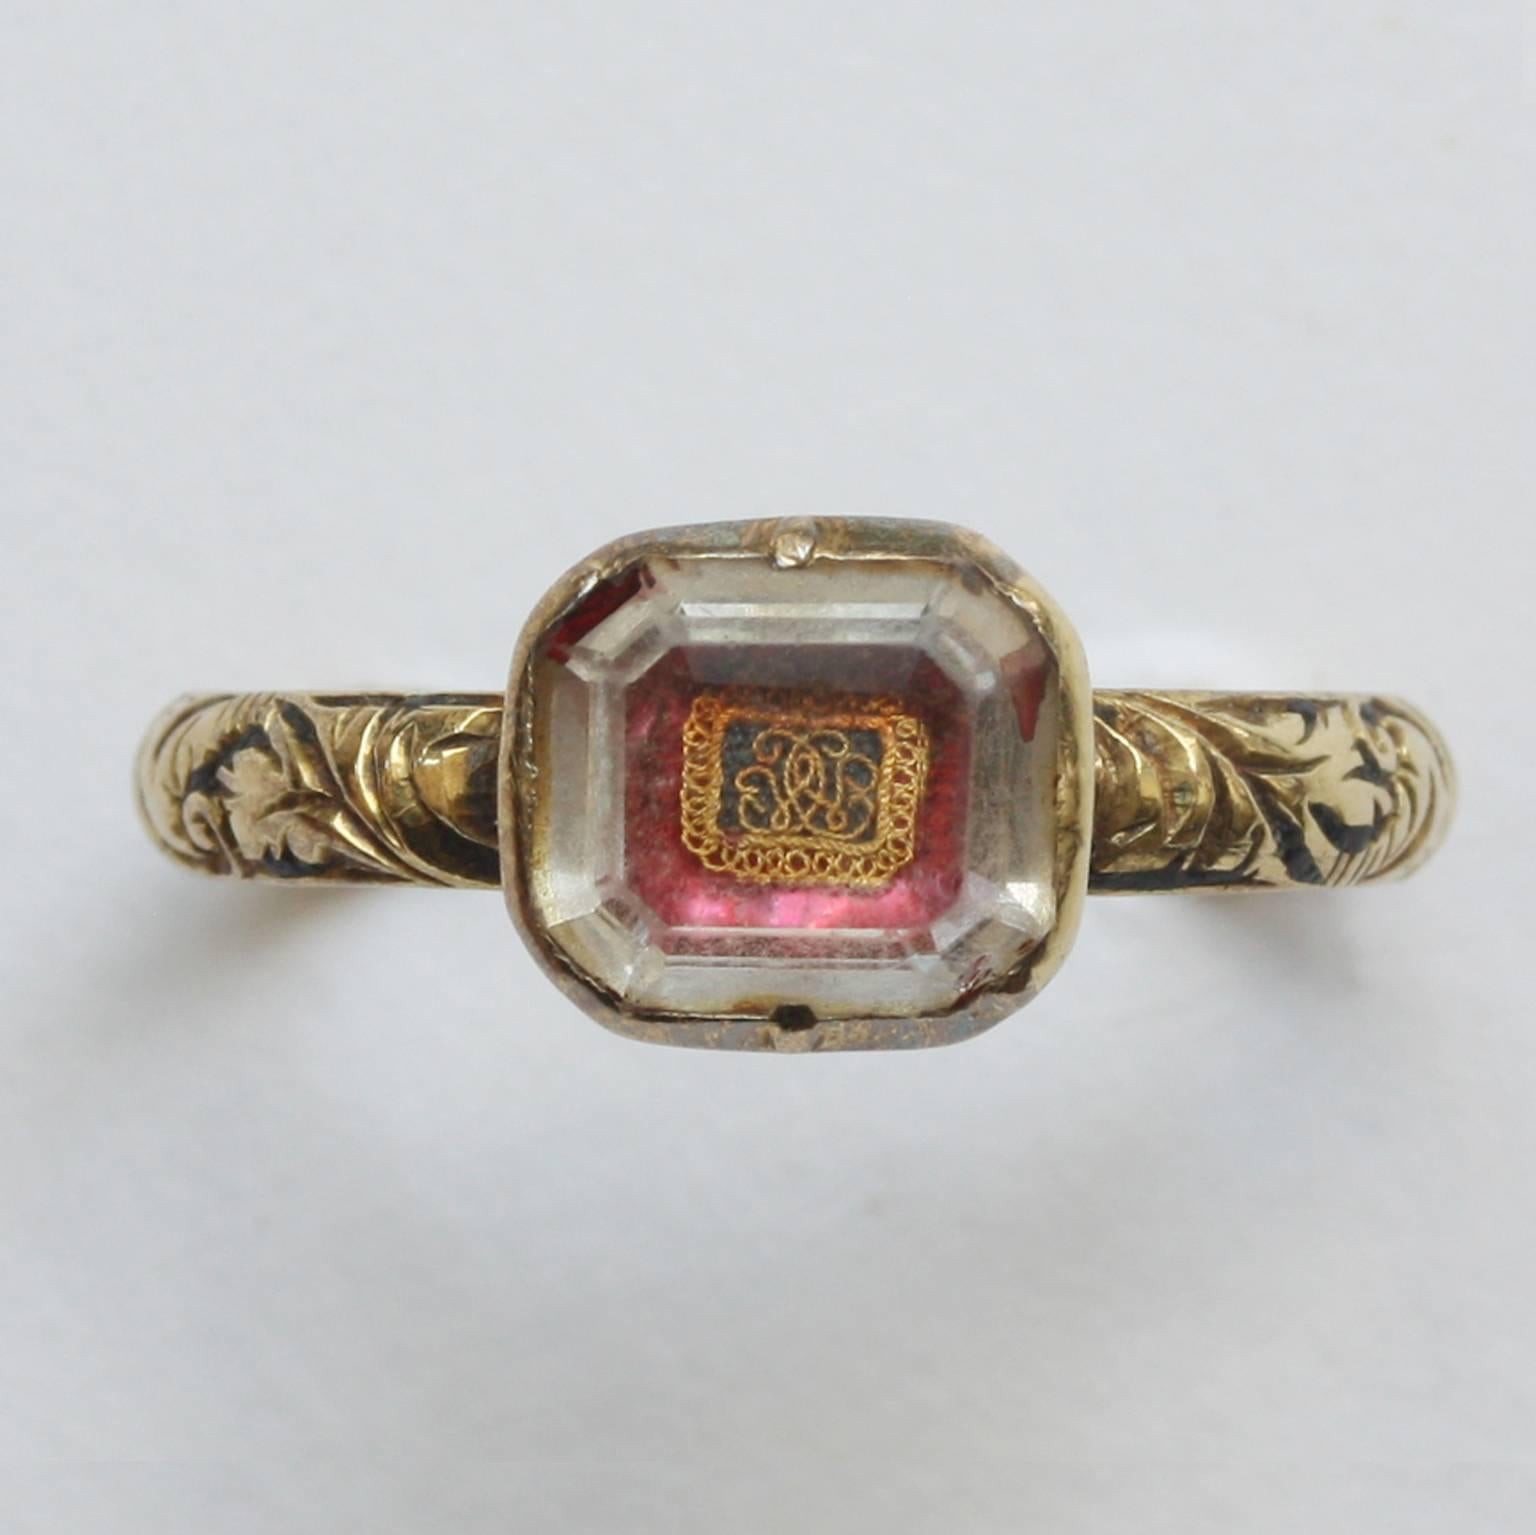 A delicate and rare gold Stuart crystal ring set with a facetted rock crystal on red foil with a gold wire cypher (CWC), the shank has floral decoration and traces of black enamel, English, late 17th century. Mint condition.

weight: 2.6